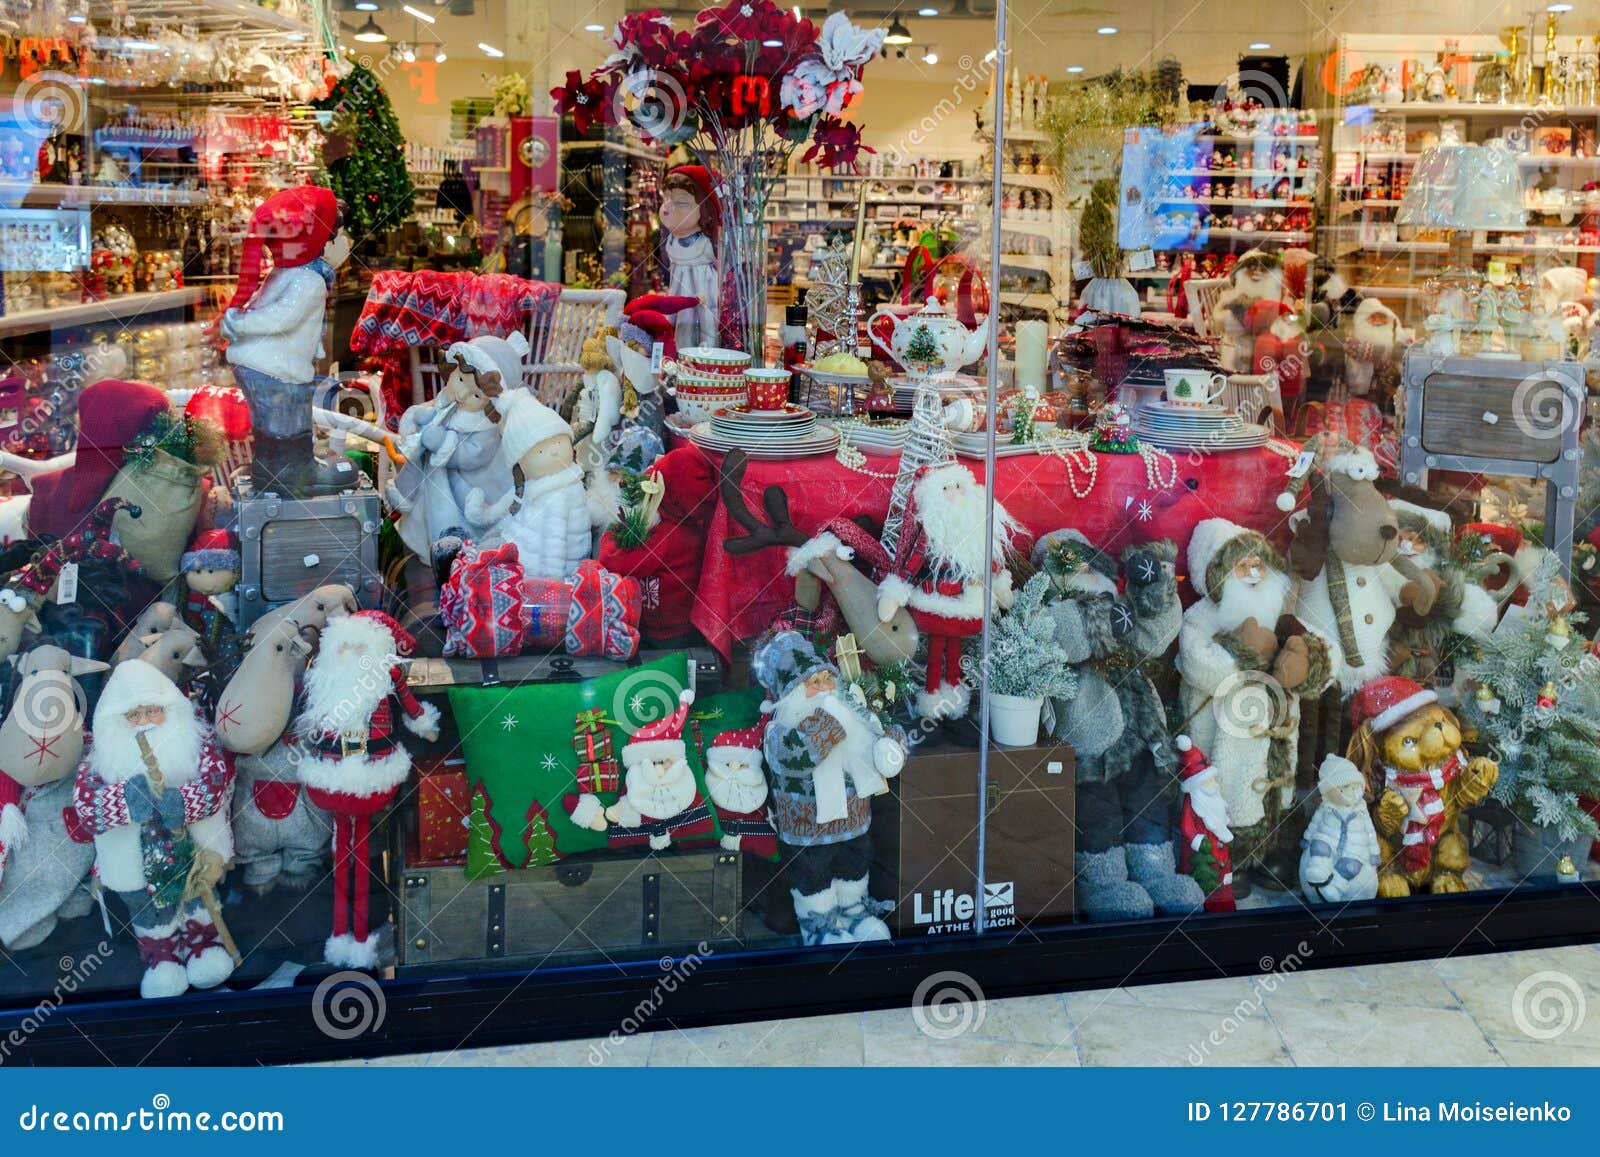 Shop Window with New Year Items, Decor, Toys - Santa Claus, Bears ...